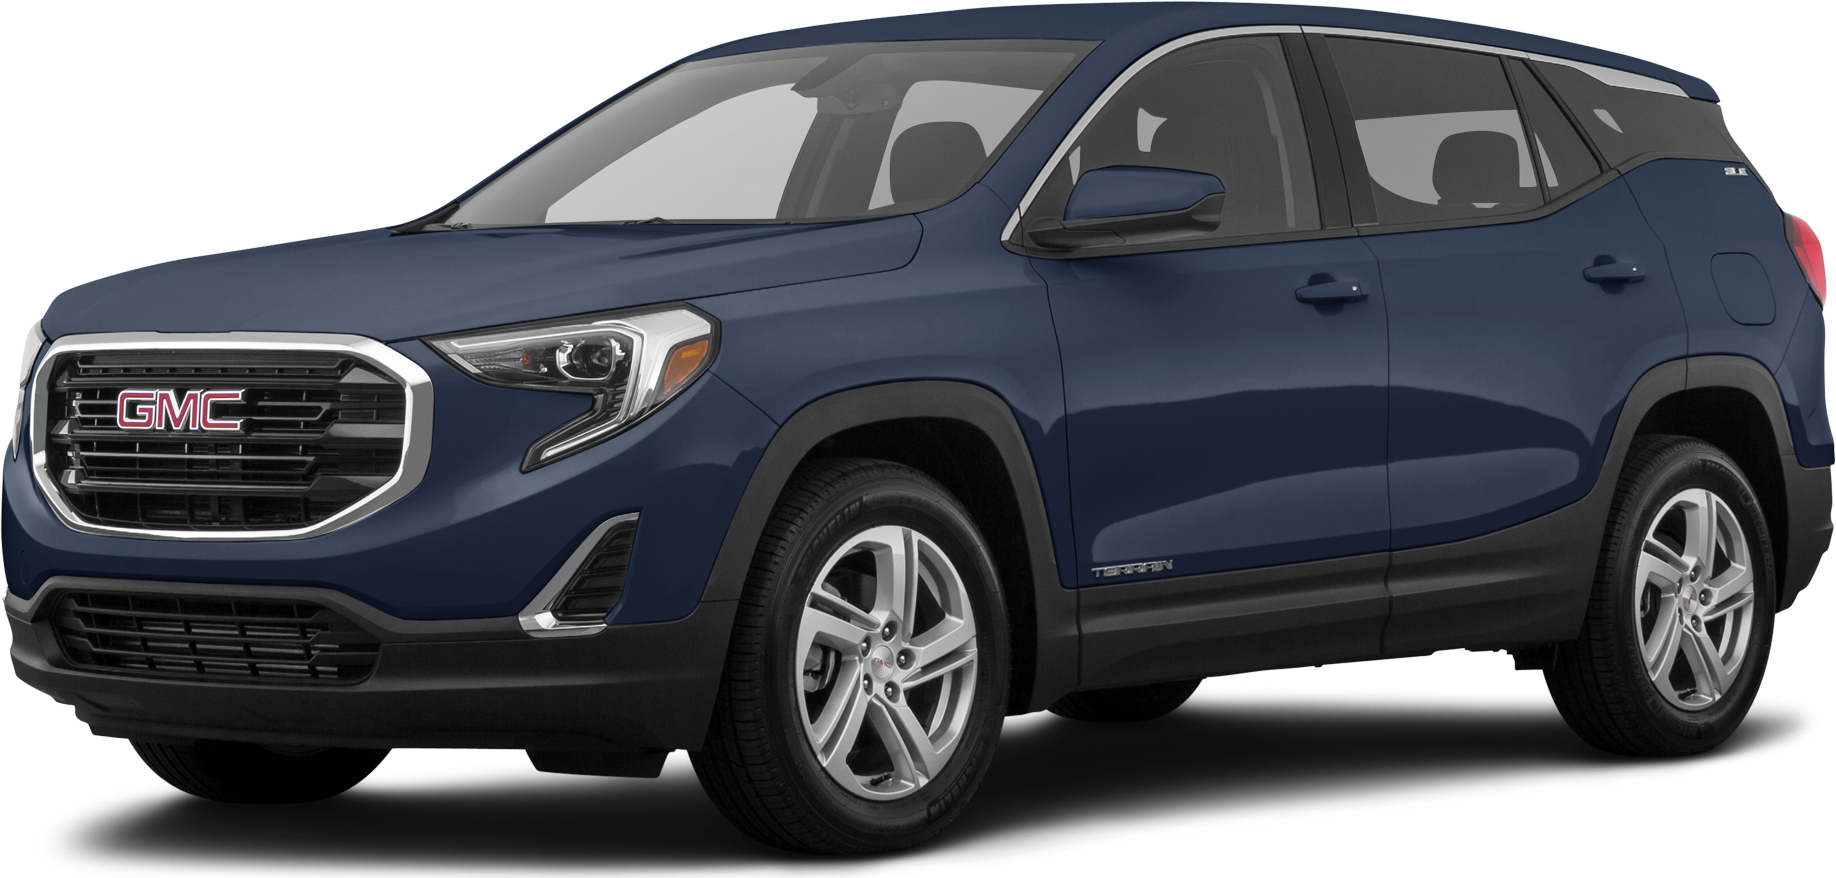 2018 Gmc Terrain Price Value Ratings And Reviews Kelley Blue Book